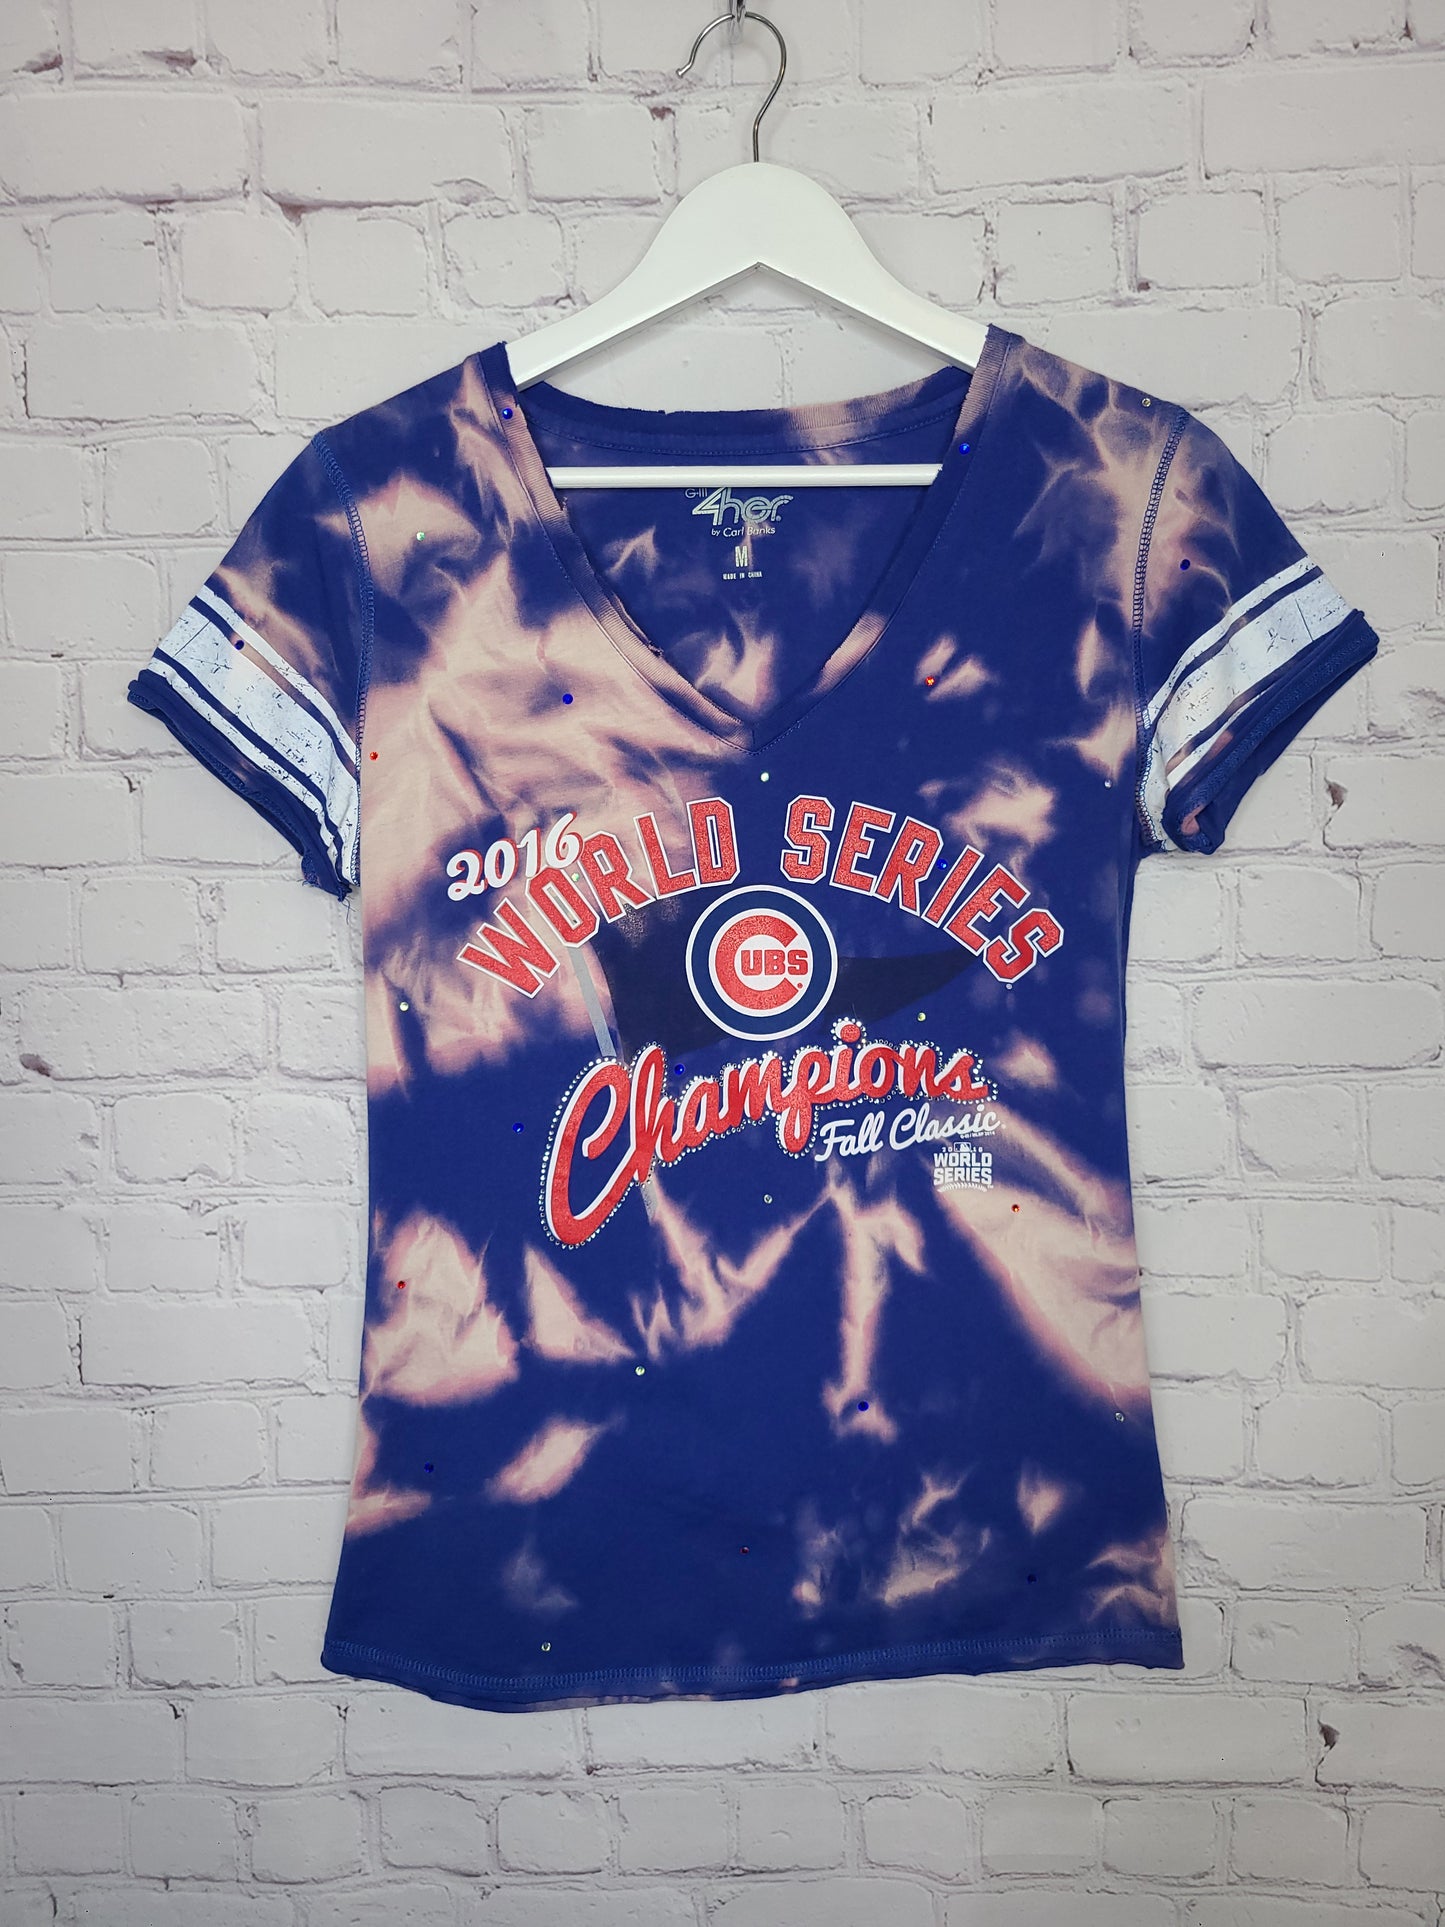 Chicago Cubs Fitted Tee